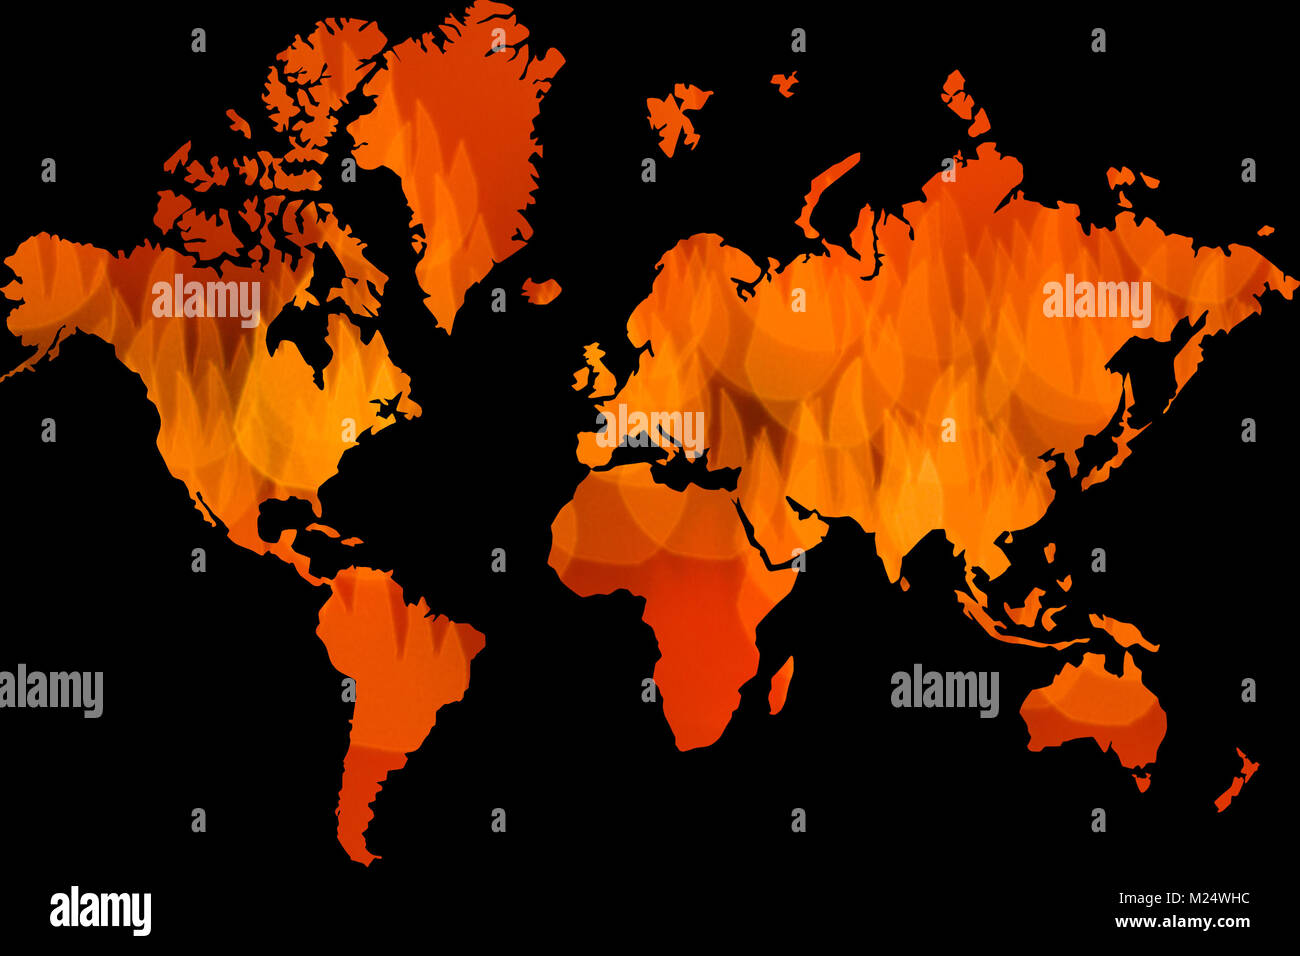 red fire icon as world map background on black Stock Photo